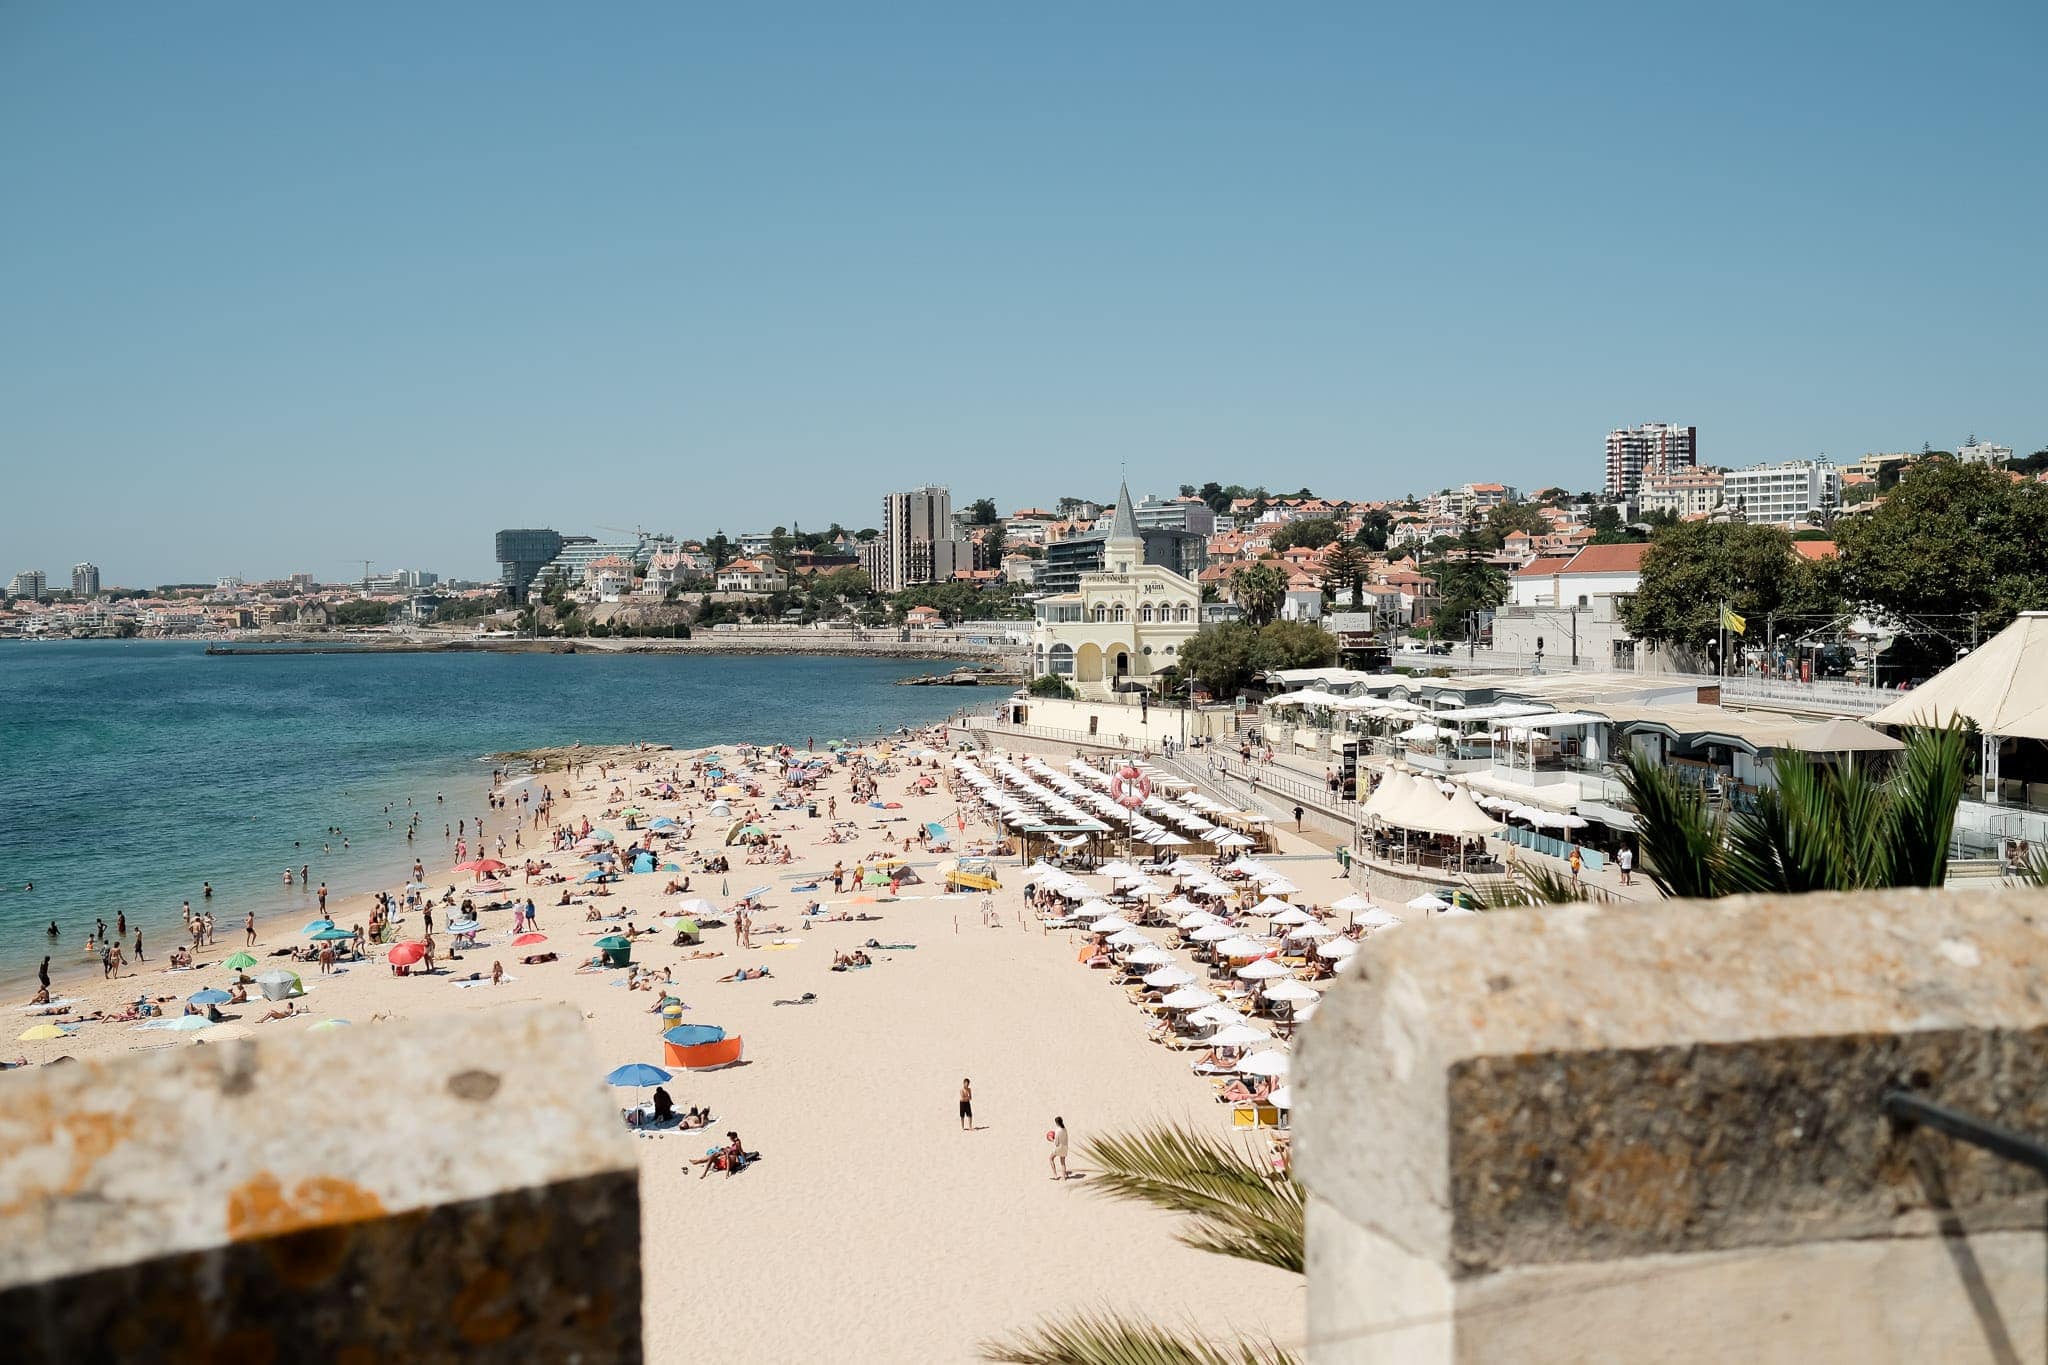 cascais coast with all the palaces and sea, sand beach from high level